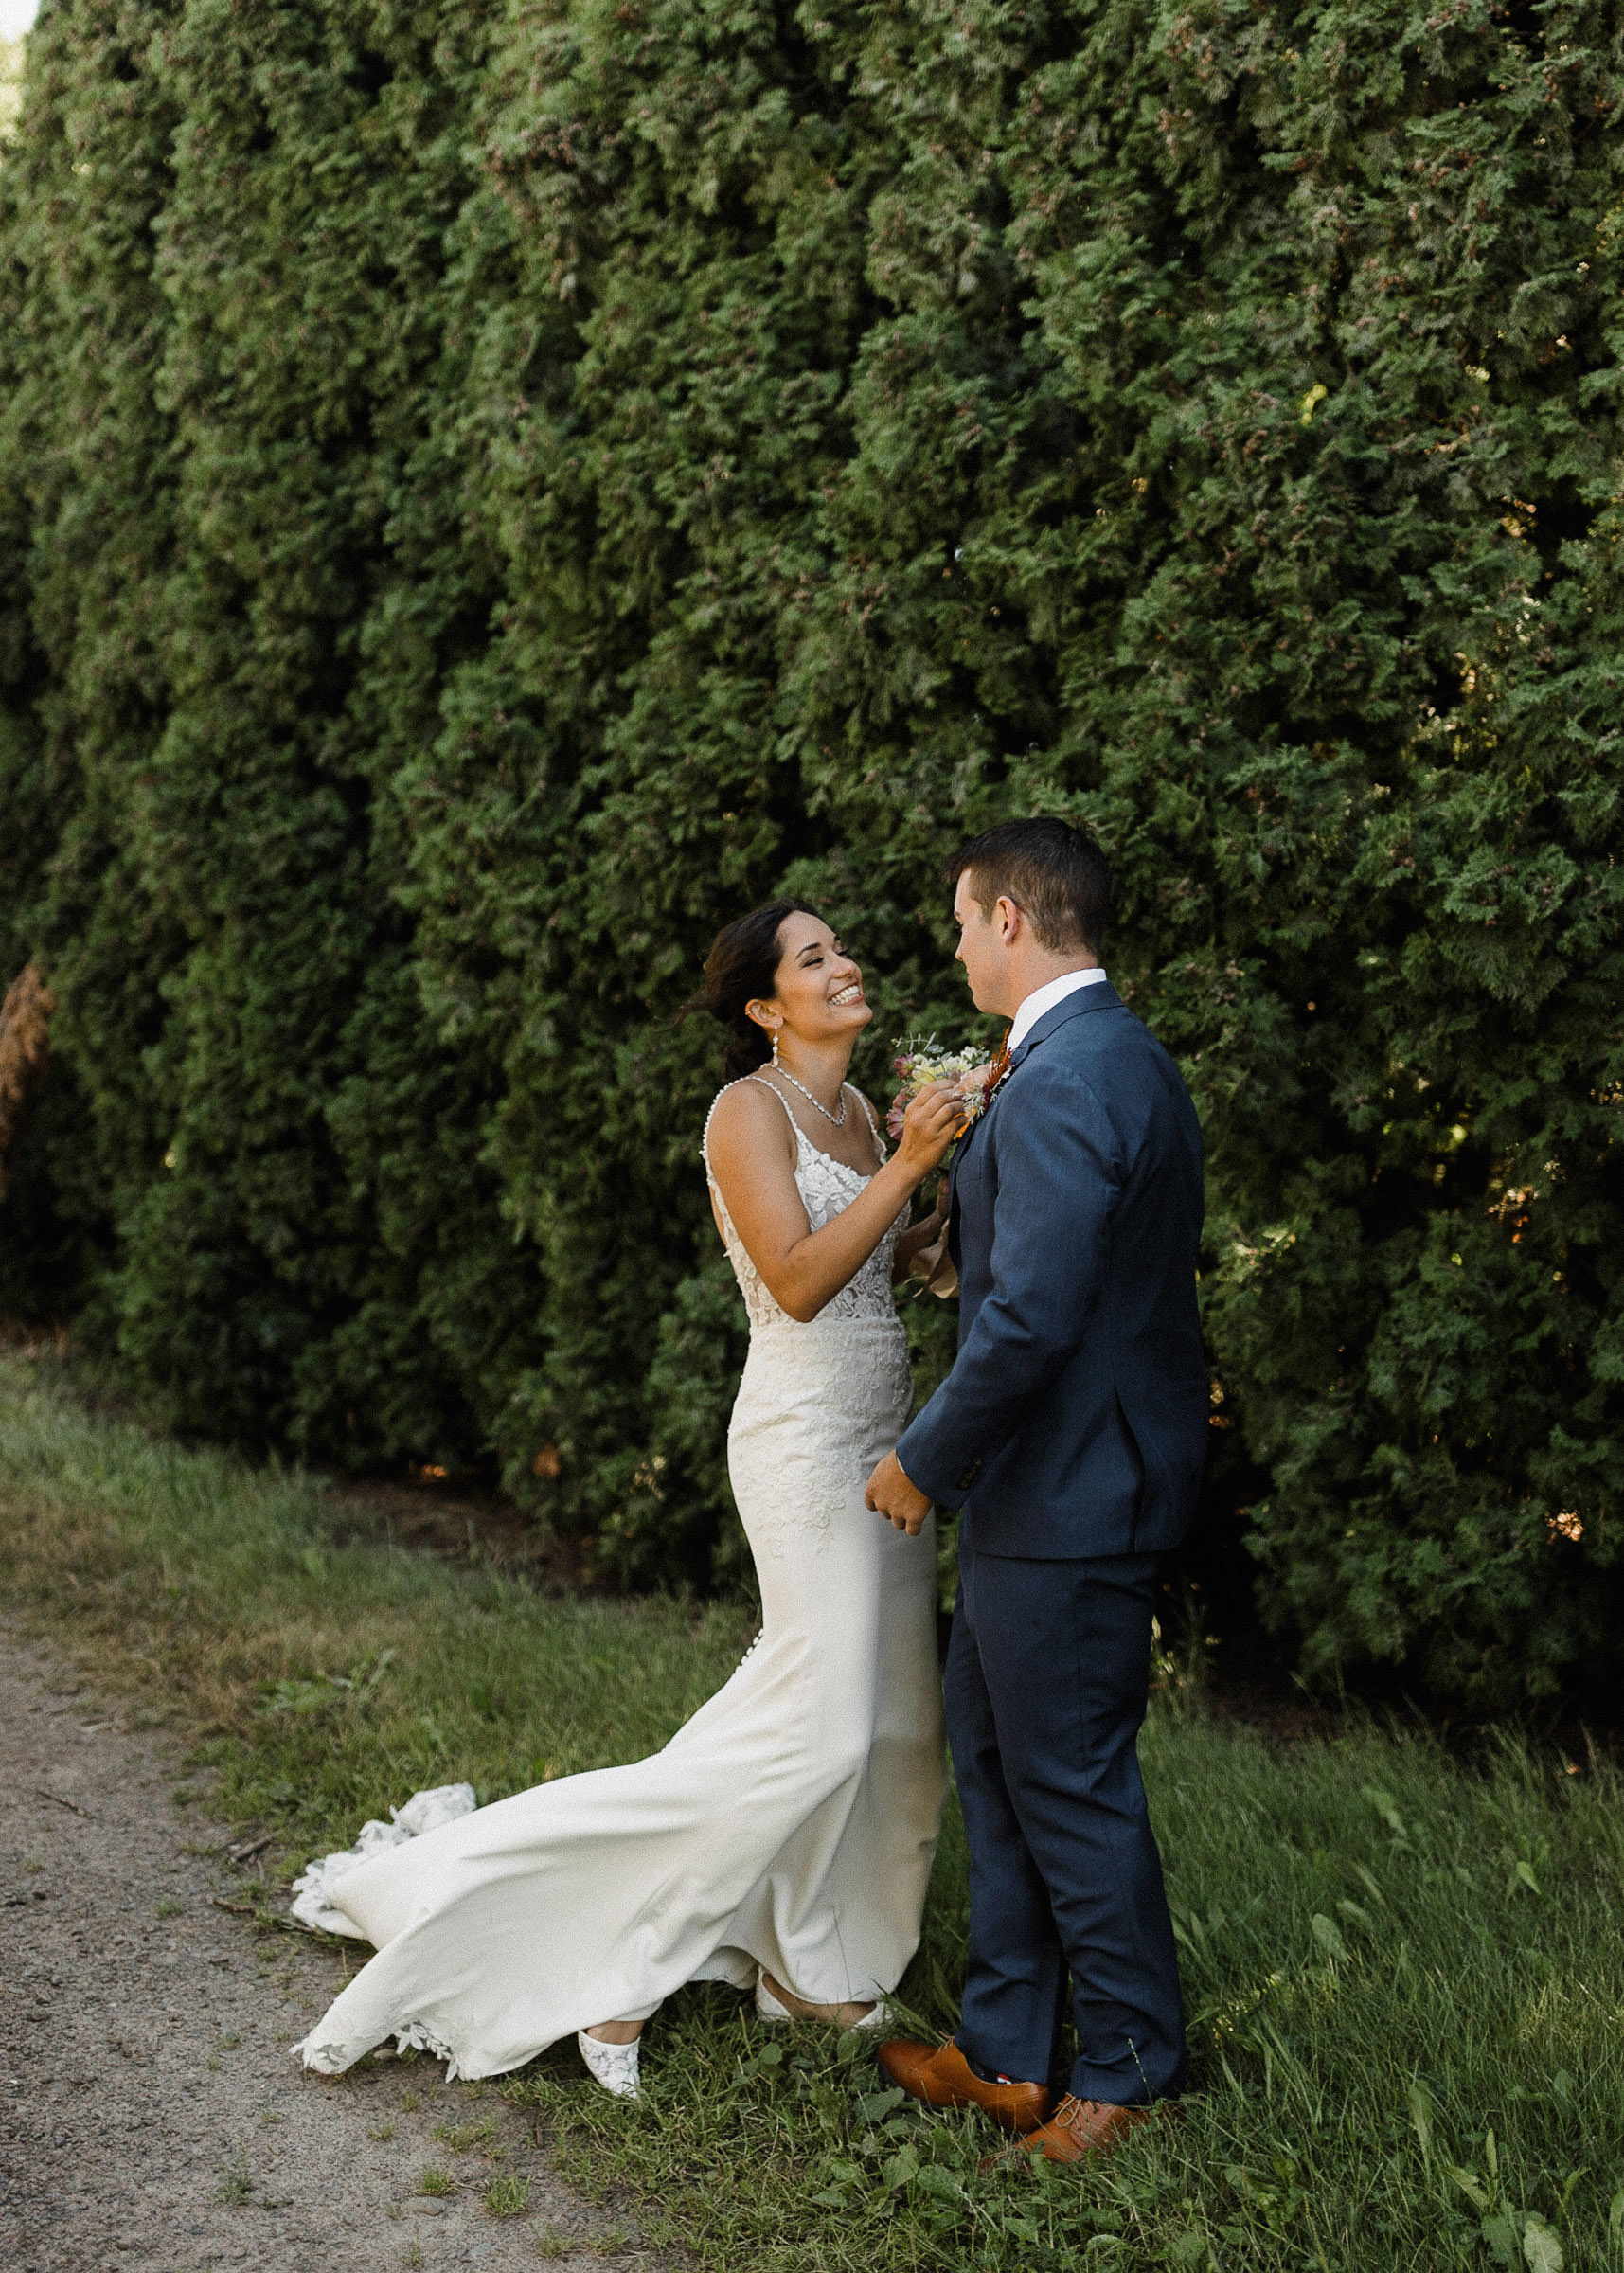 Bride smiling as she sees the groom for a first look in front of a row of hedge trees